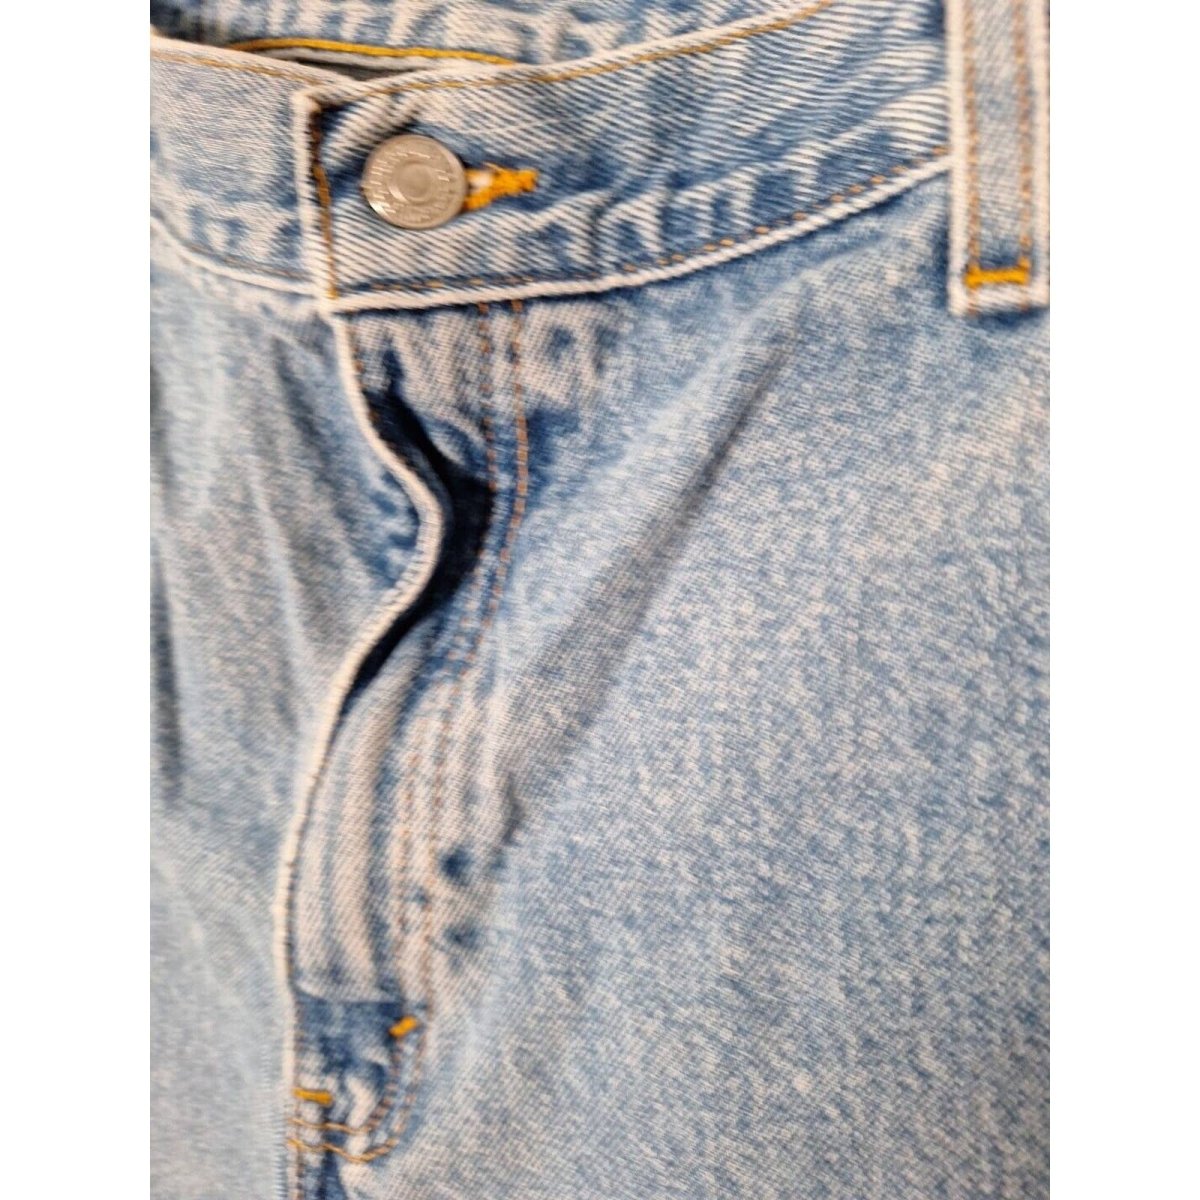 Vintage 90s/Y2K Levis 550 All Cotton Stone Wash Jeans Unisex Size 34x30 Women 12 - themallvintage The Mall Vintage